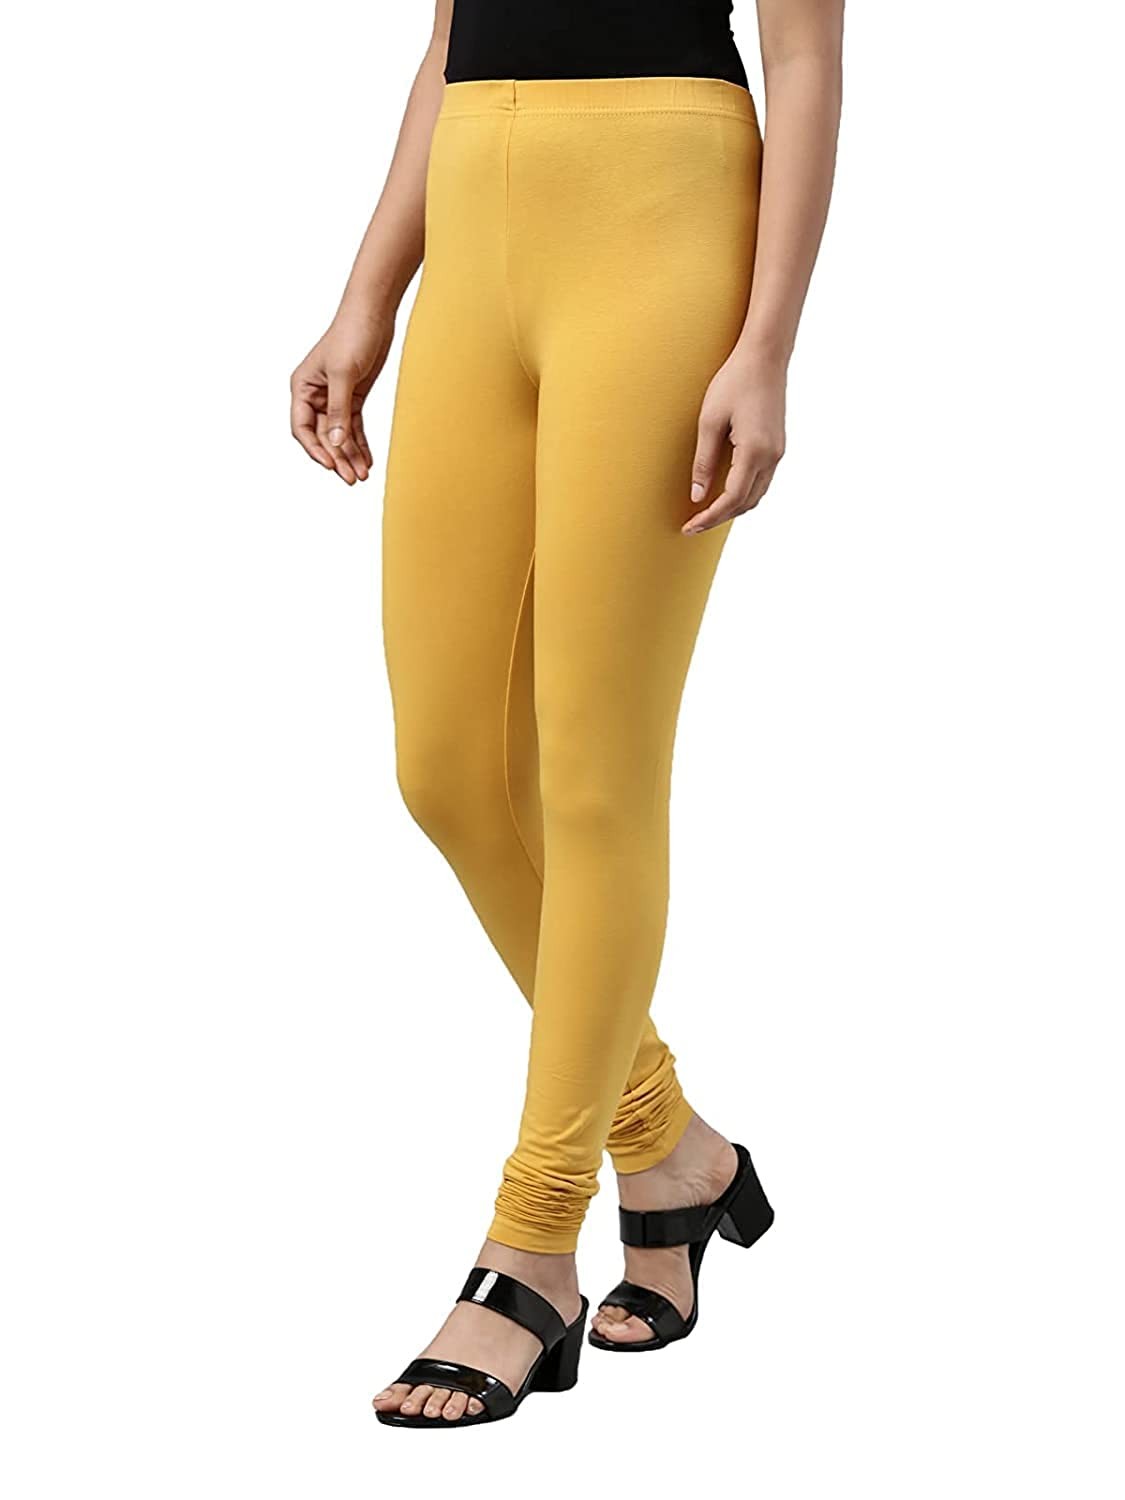 MM Style- Women's 4-Way Stretch Leggings for Every Occasion (Dark Yellow)